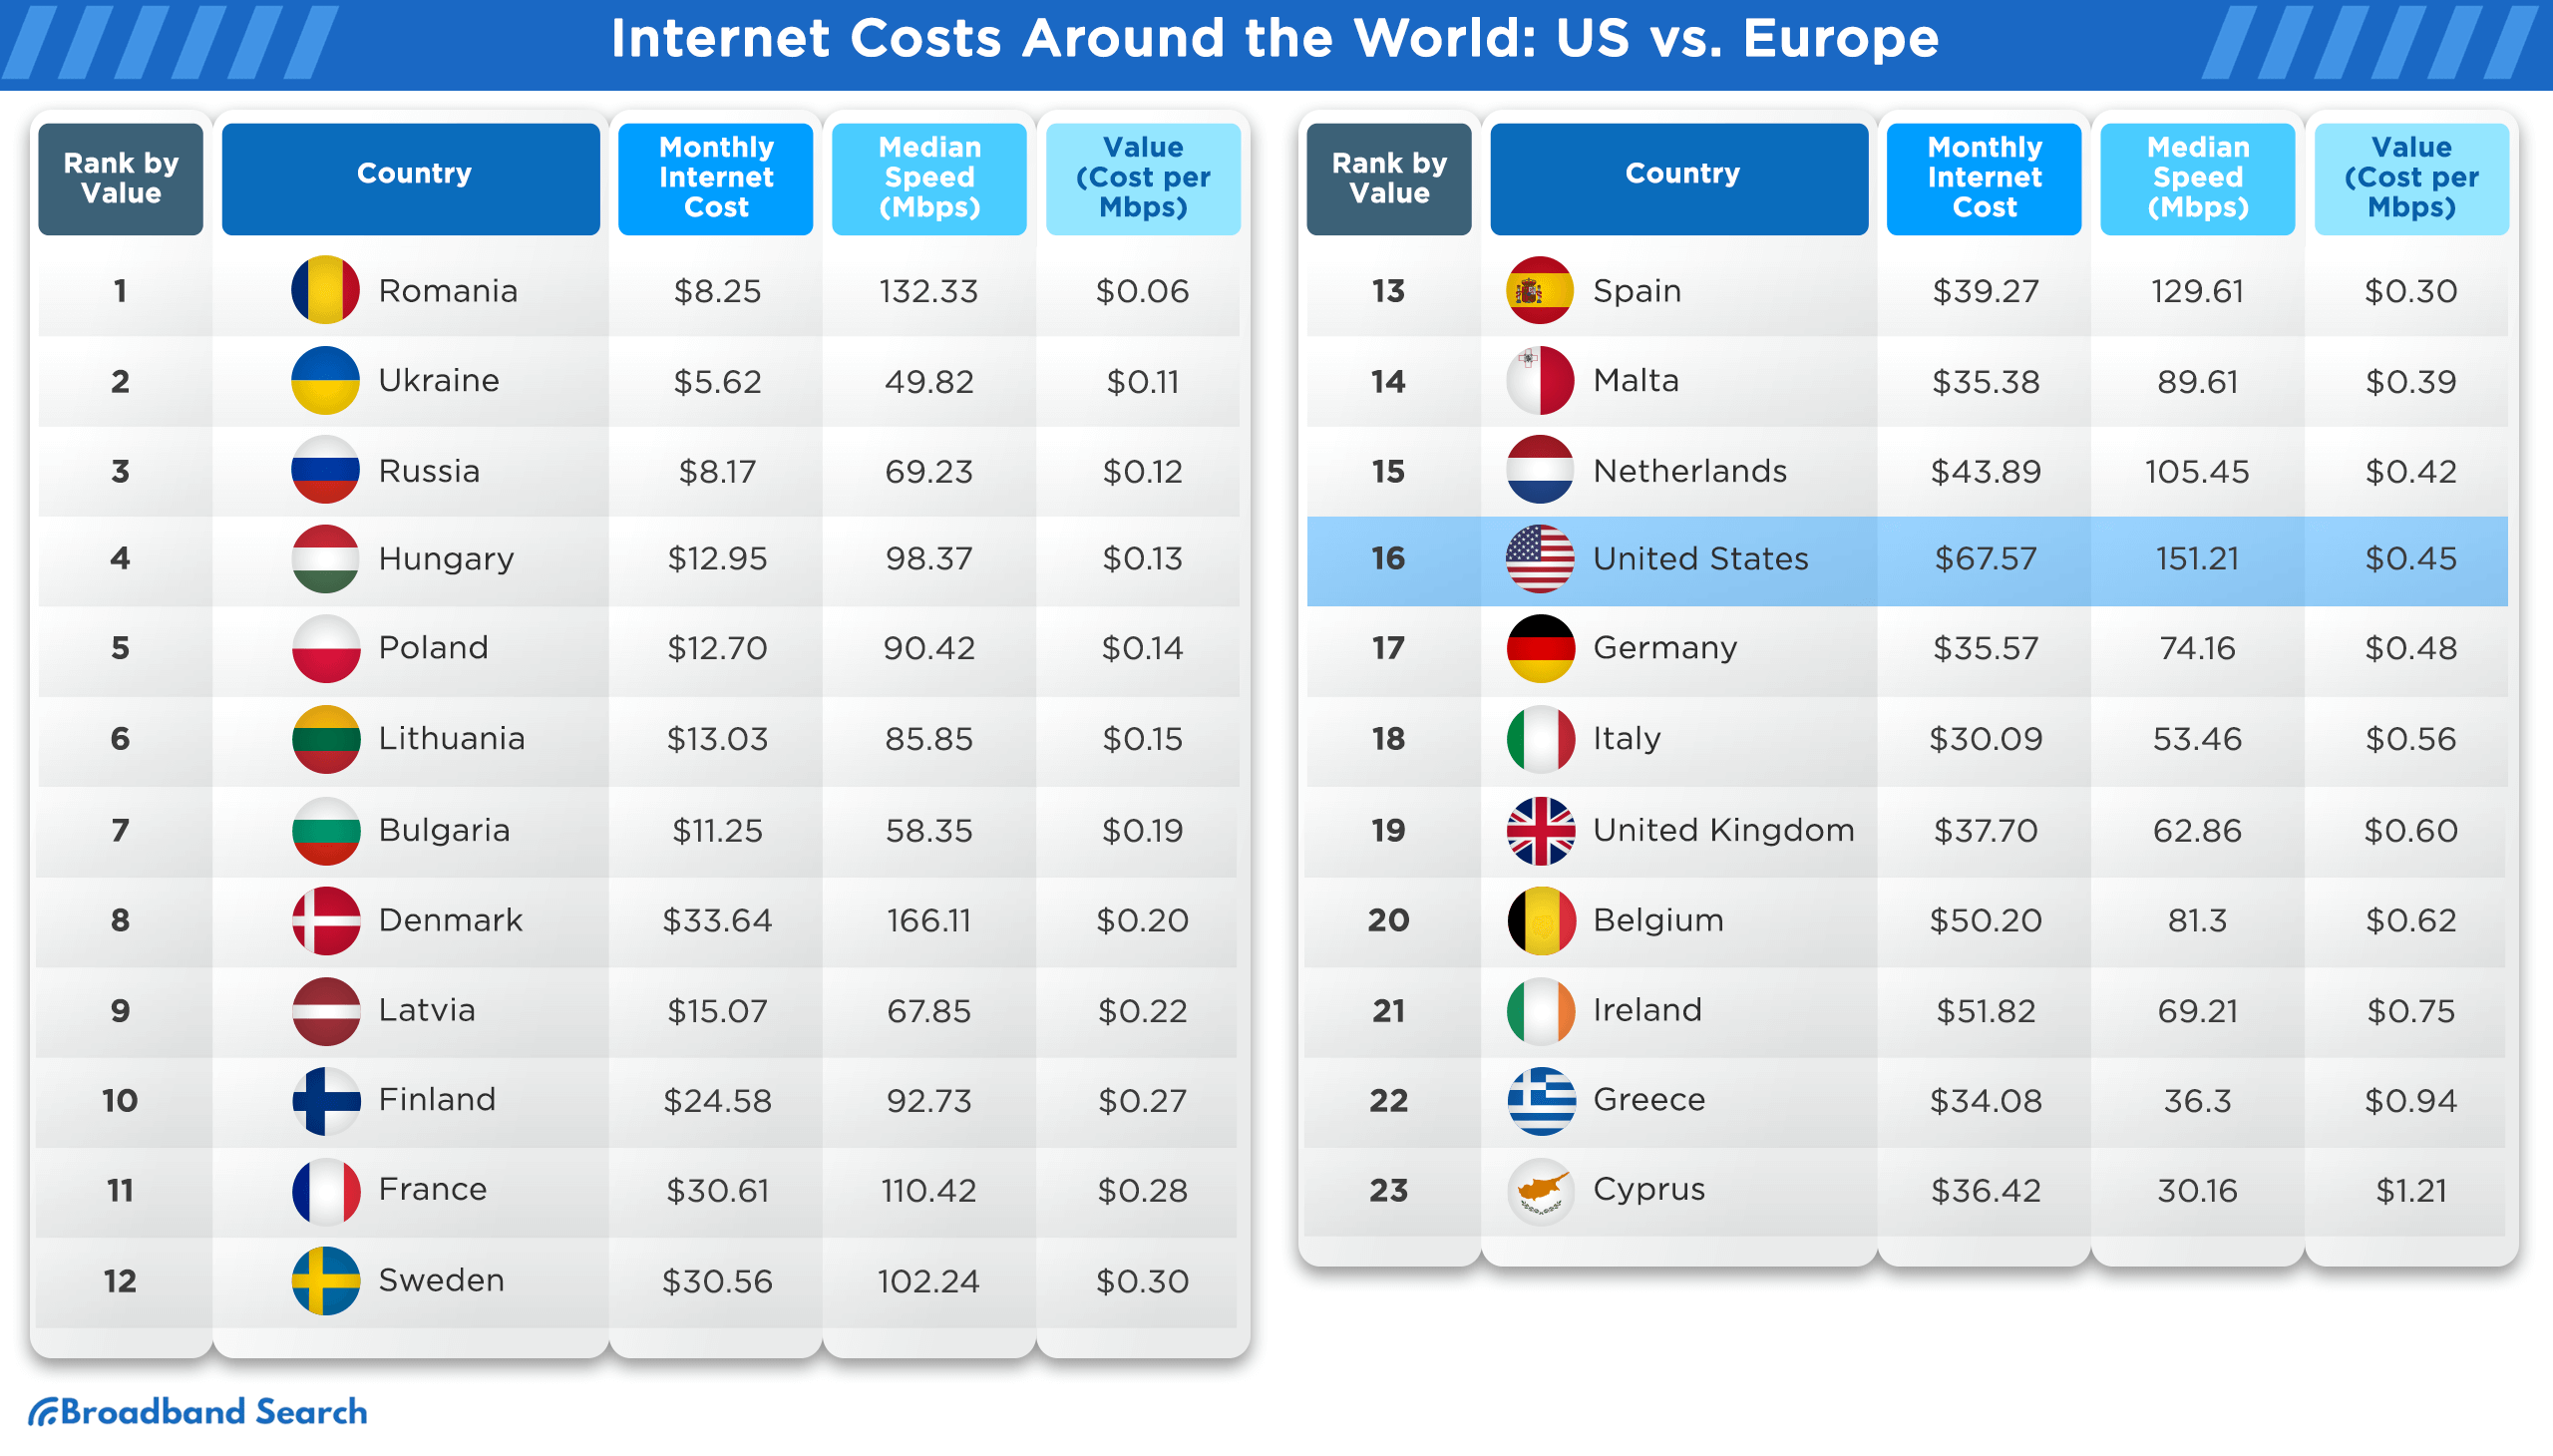 Comparison of internet costs between the US and countries located in Europe